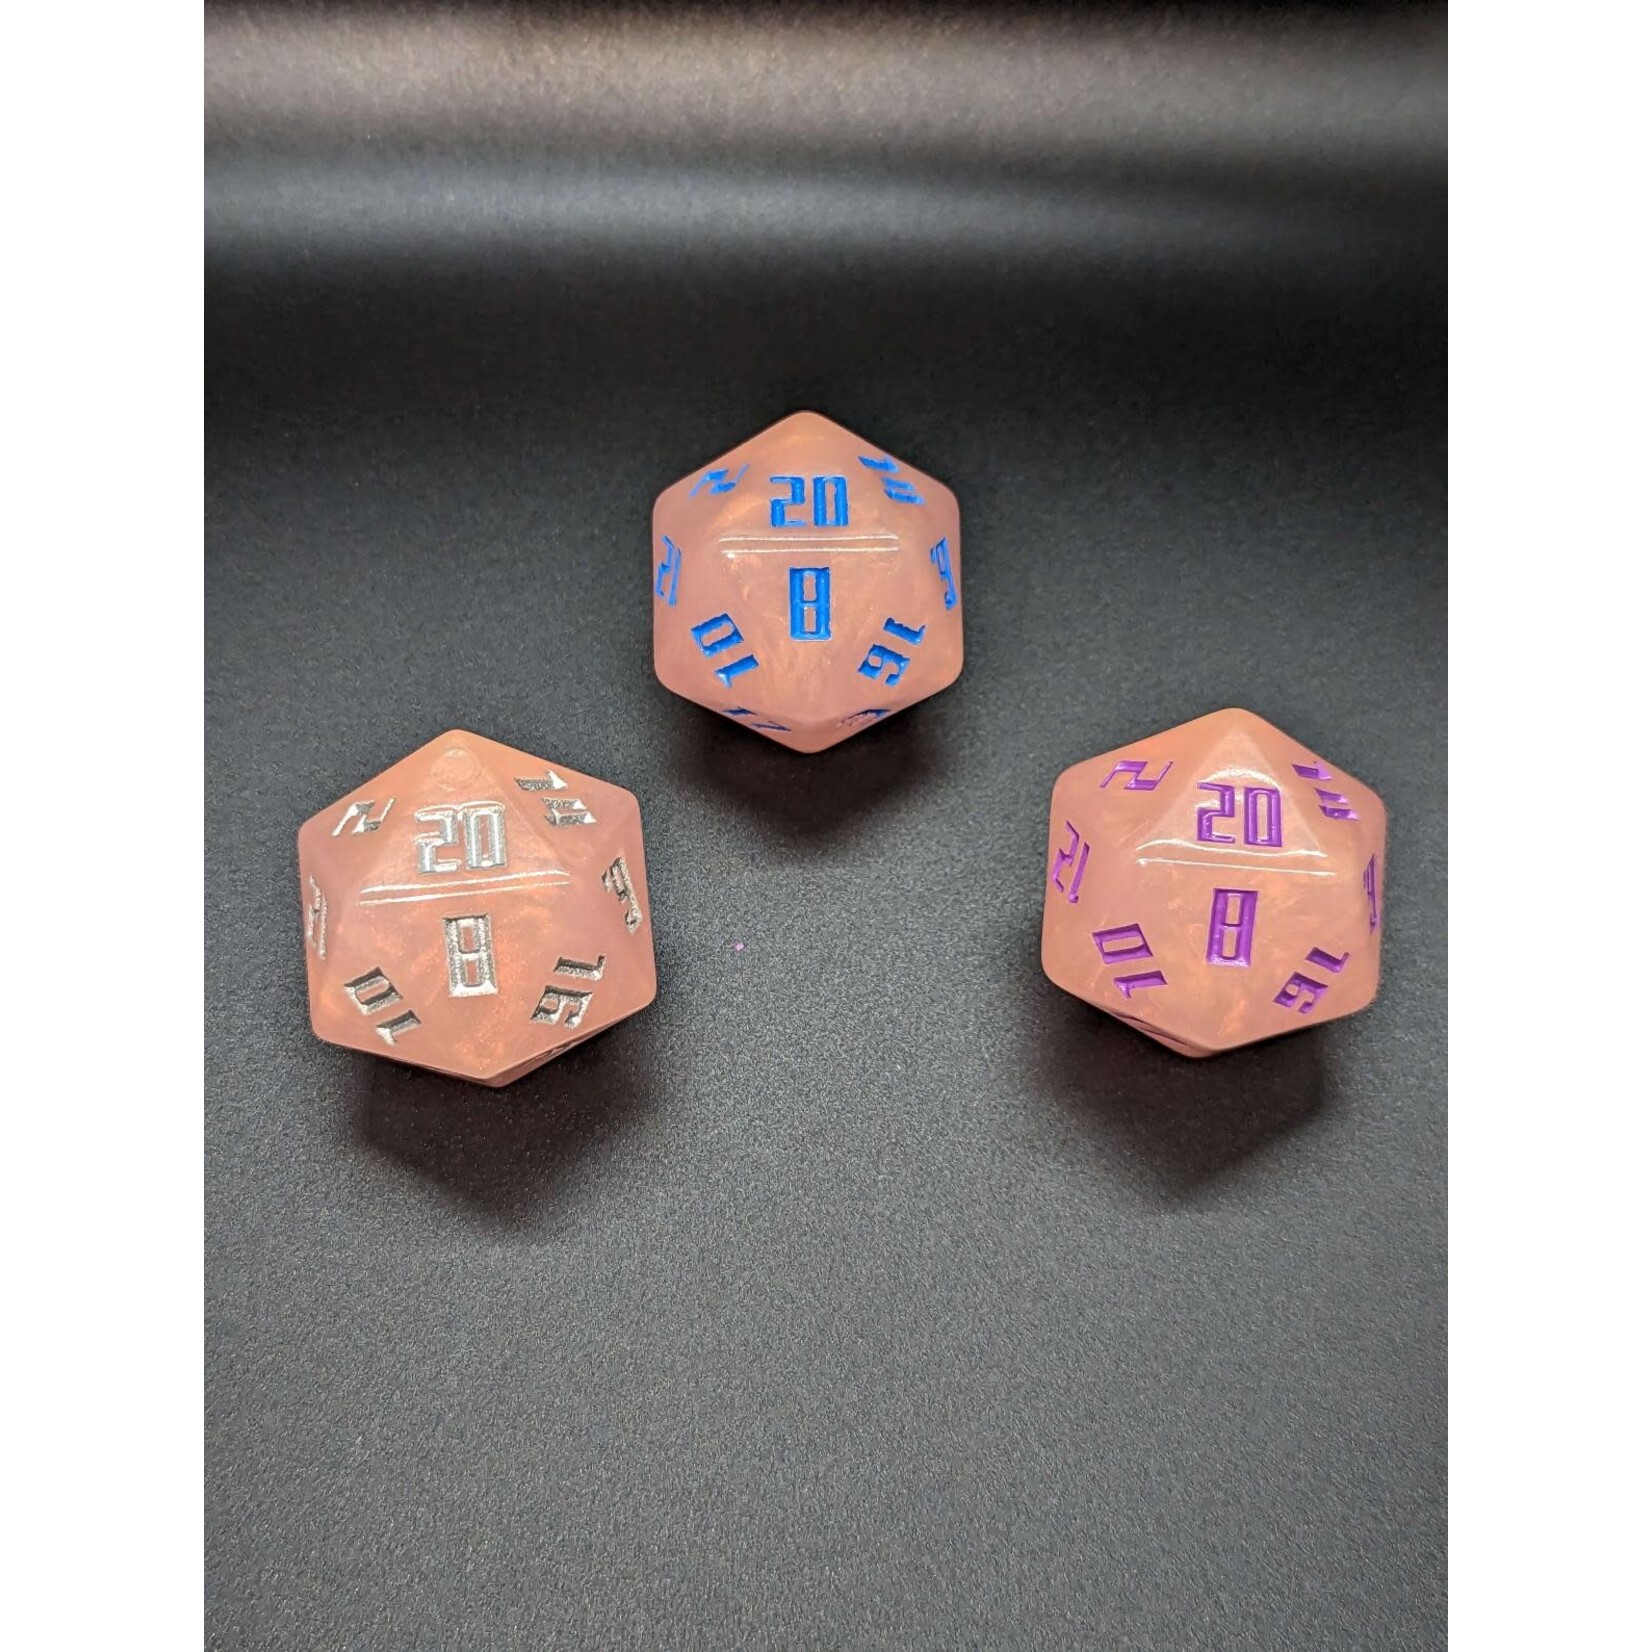 CLC Oversized Pink d20 MG34001